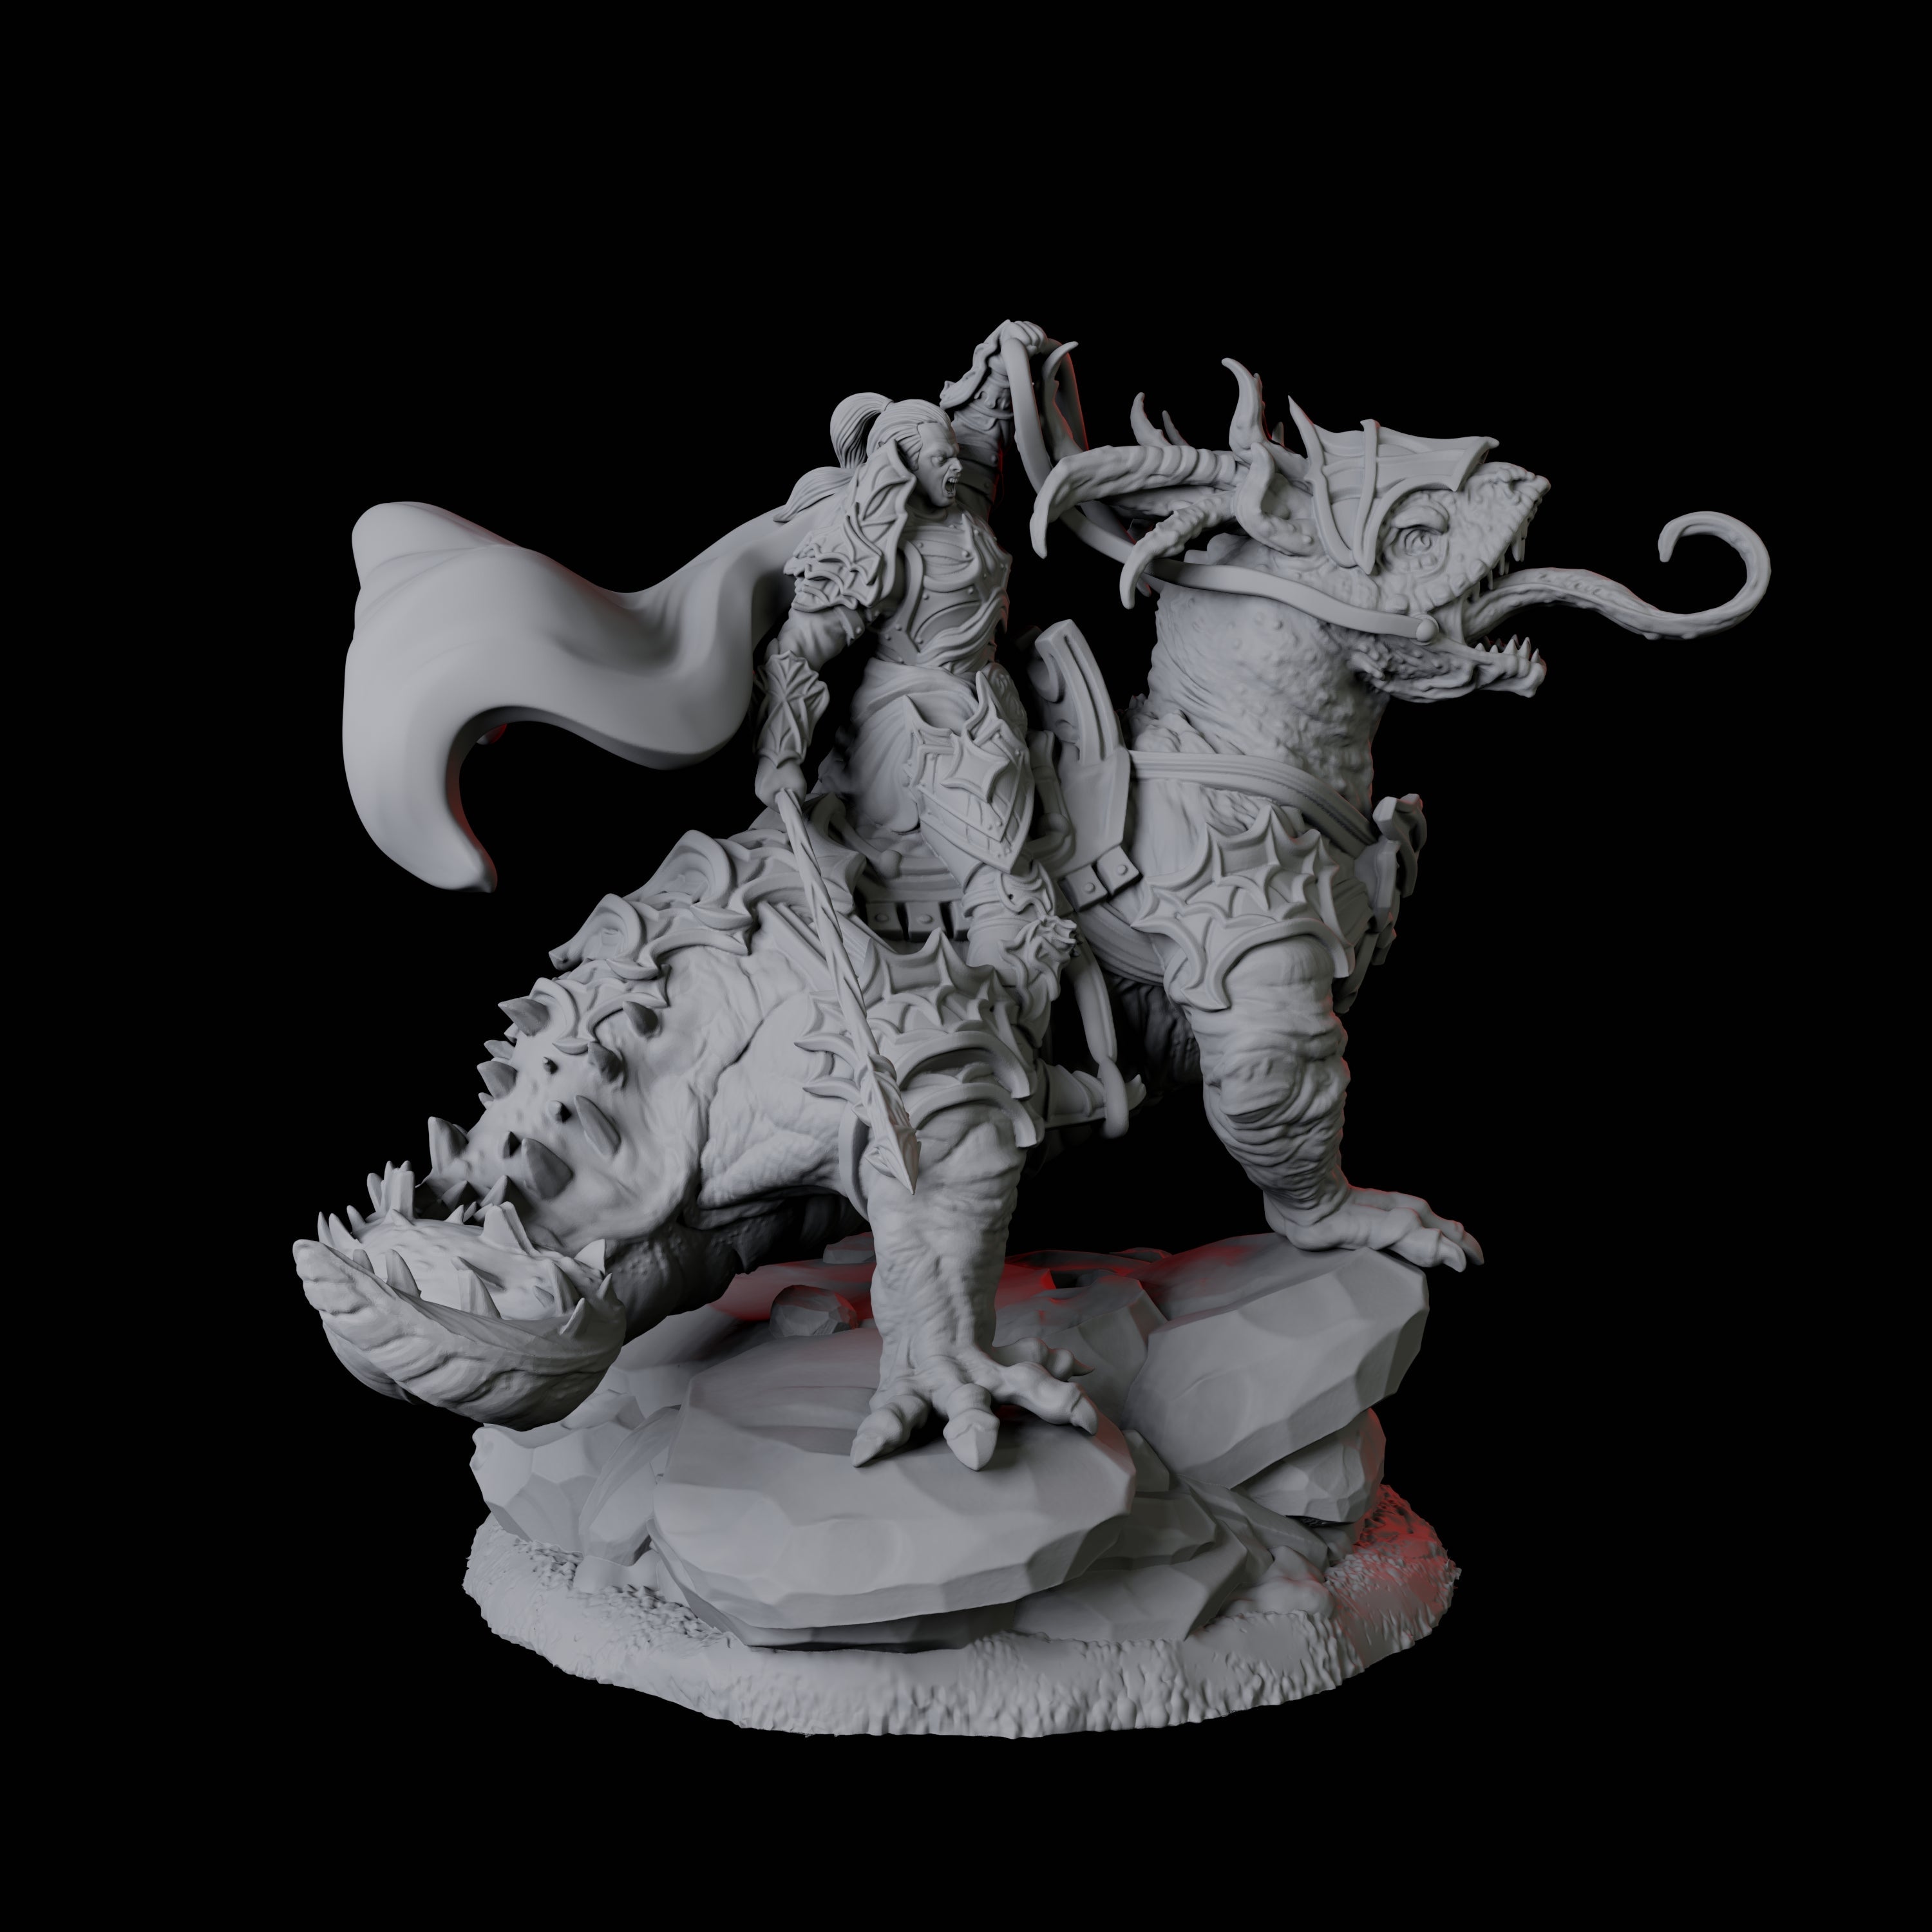 Fighter mounted on Giant Lizard A Miniature for Dungeons and Dragons, Pathfinder or other TTRPGs